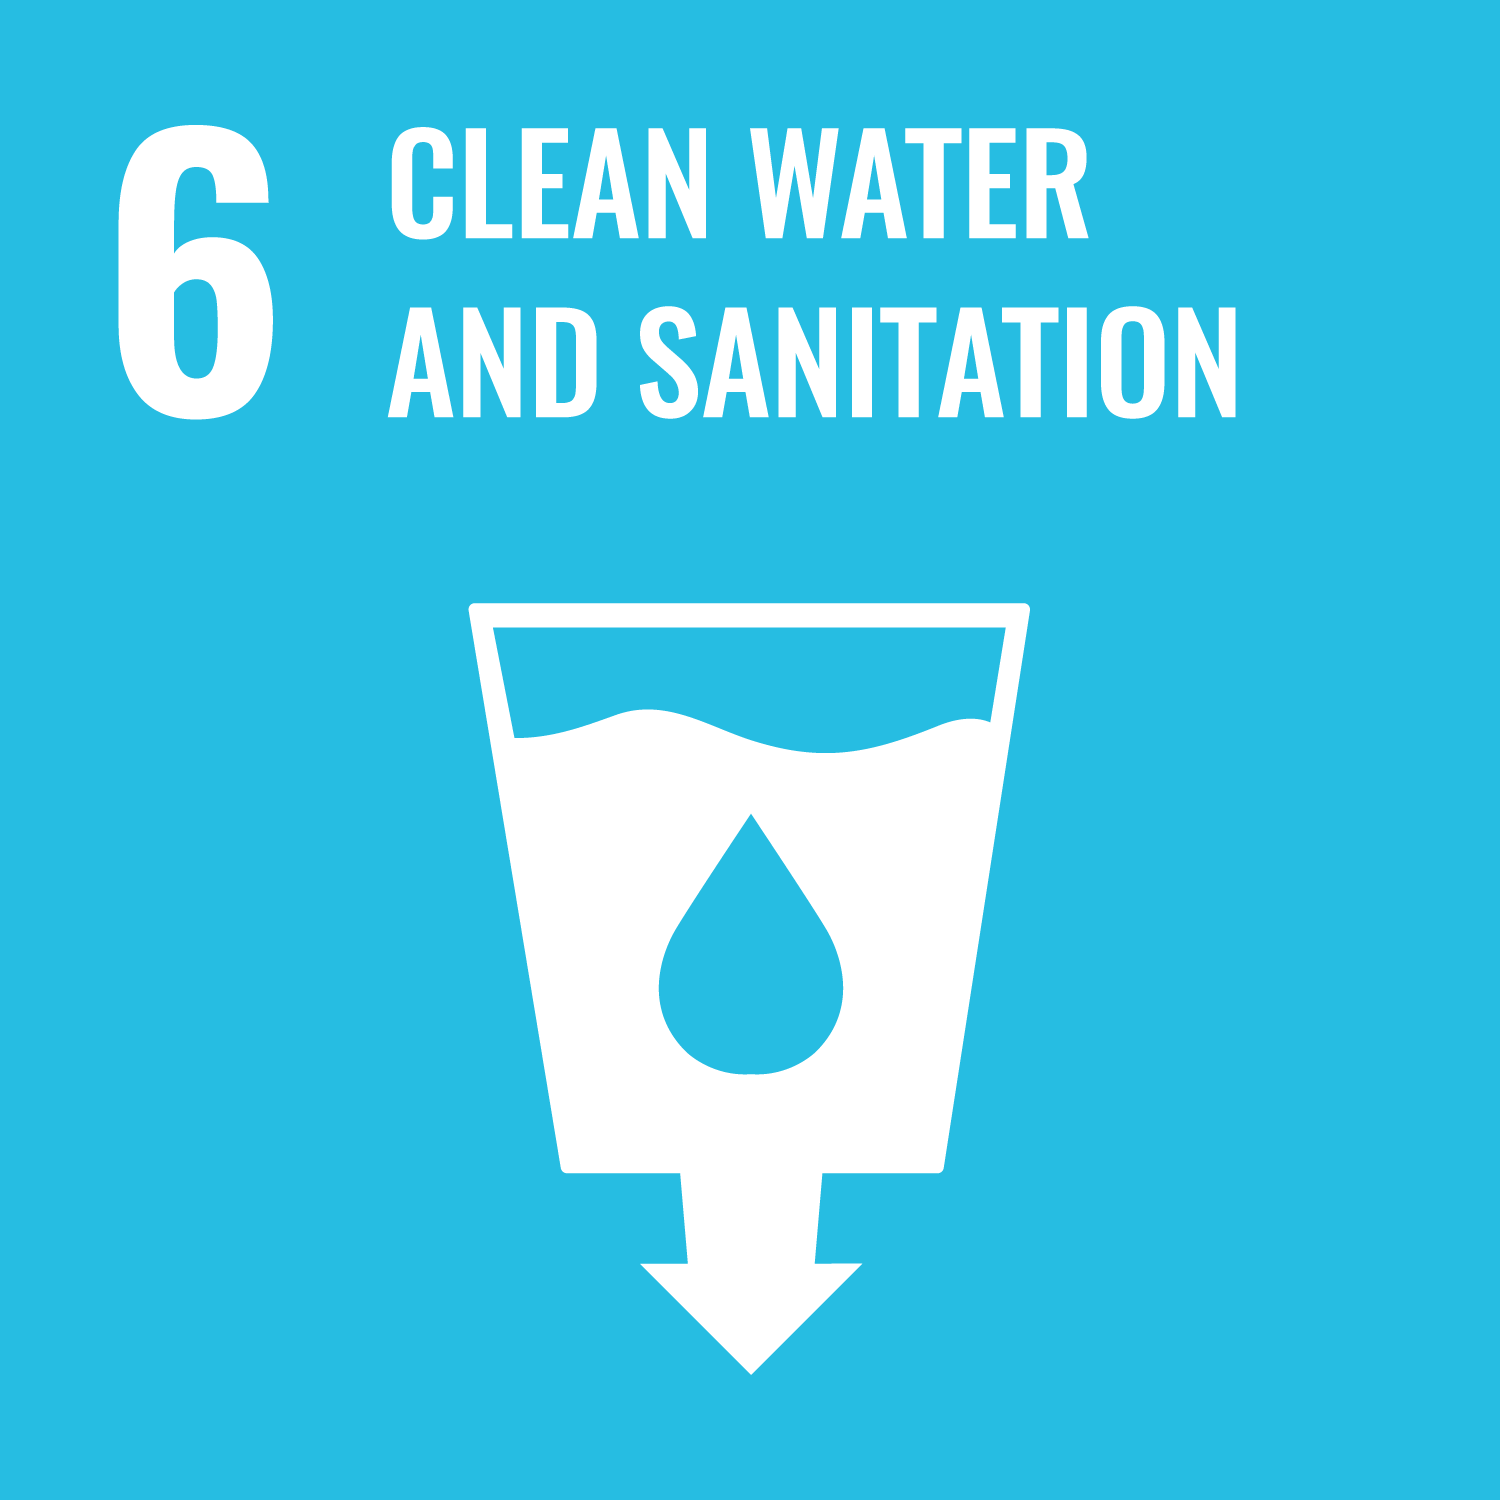 Sustainable Development Goals (SDG6) Clean Water and Sanitation